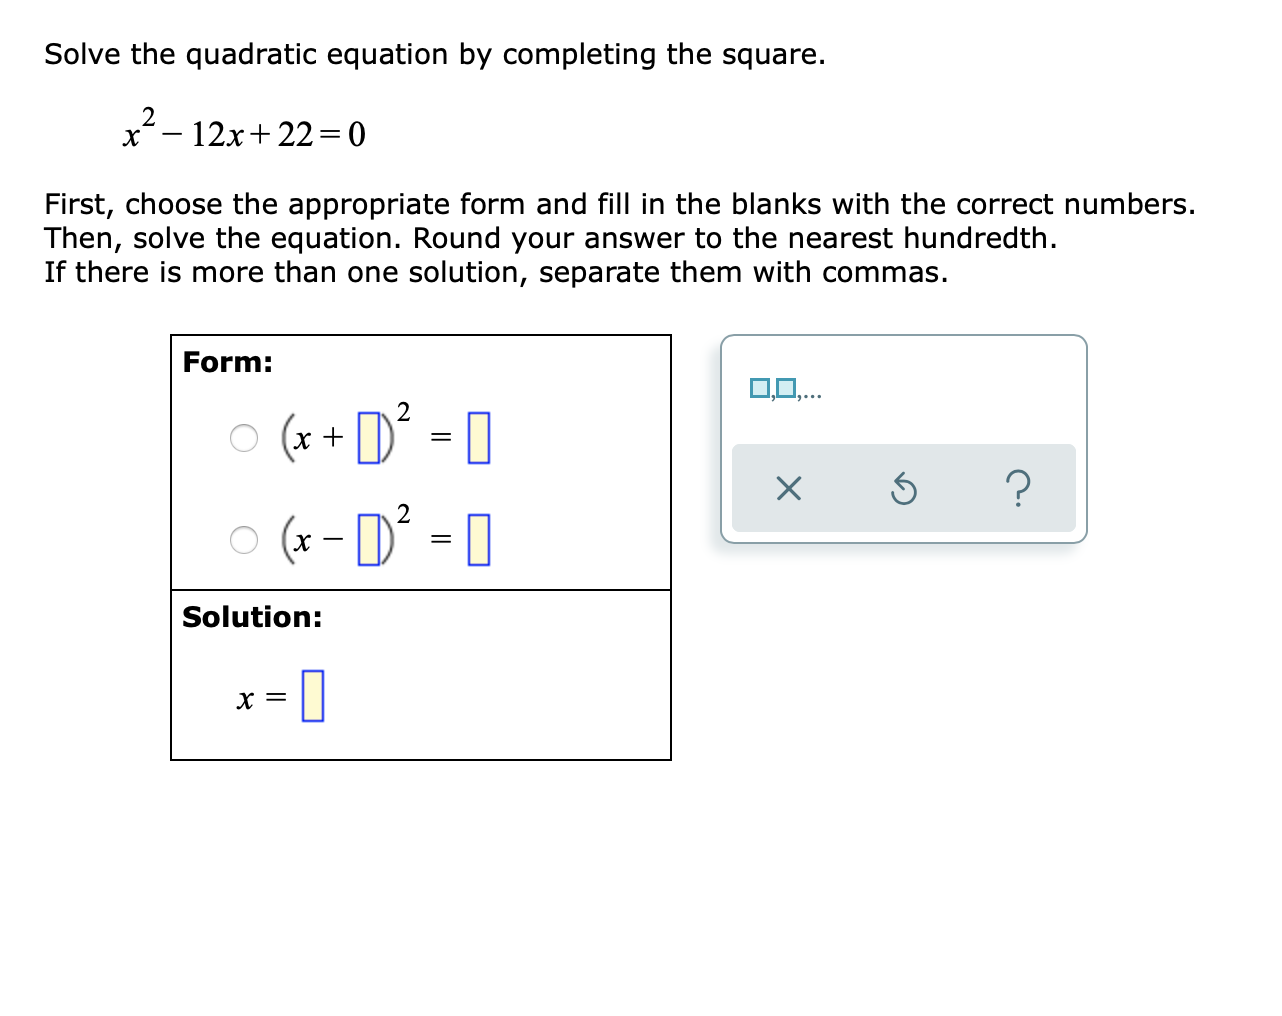 Solve the quadratic equation by completing the square.
2
12x+ 22 = 0
First, choose the appropriate form and fill in the blanks with the correct numbers
Then, solve the equation. Round your answer to the nearest hundredth.
If there is more than one solution, separate them with commas.
Form:
o (x + D = 0
O (x - D' = 0
Solution:
X =
